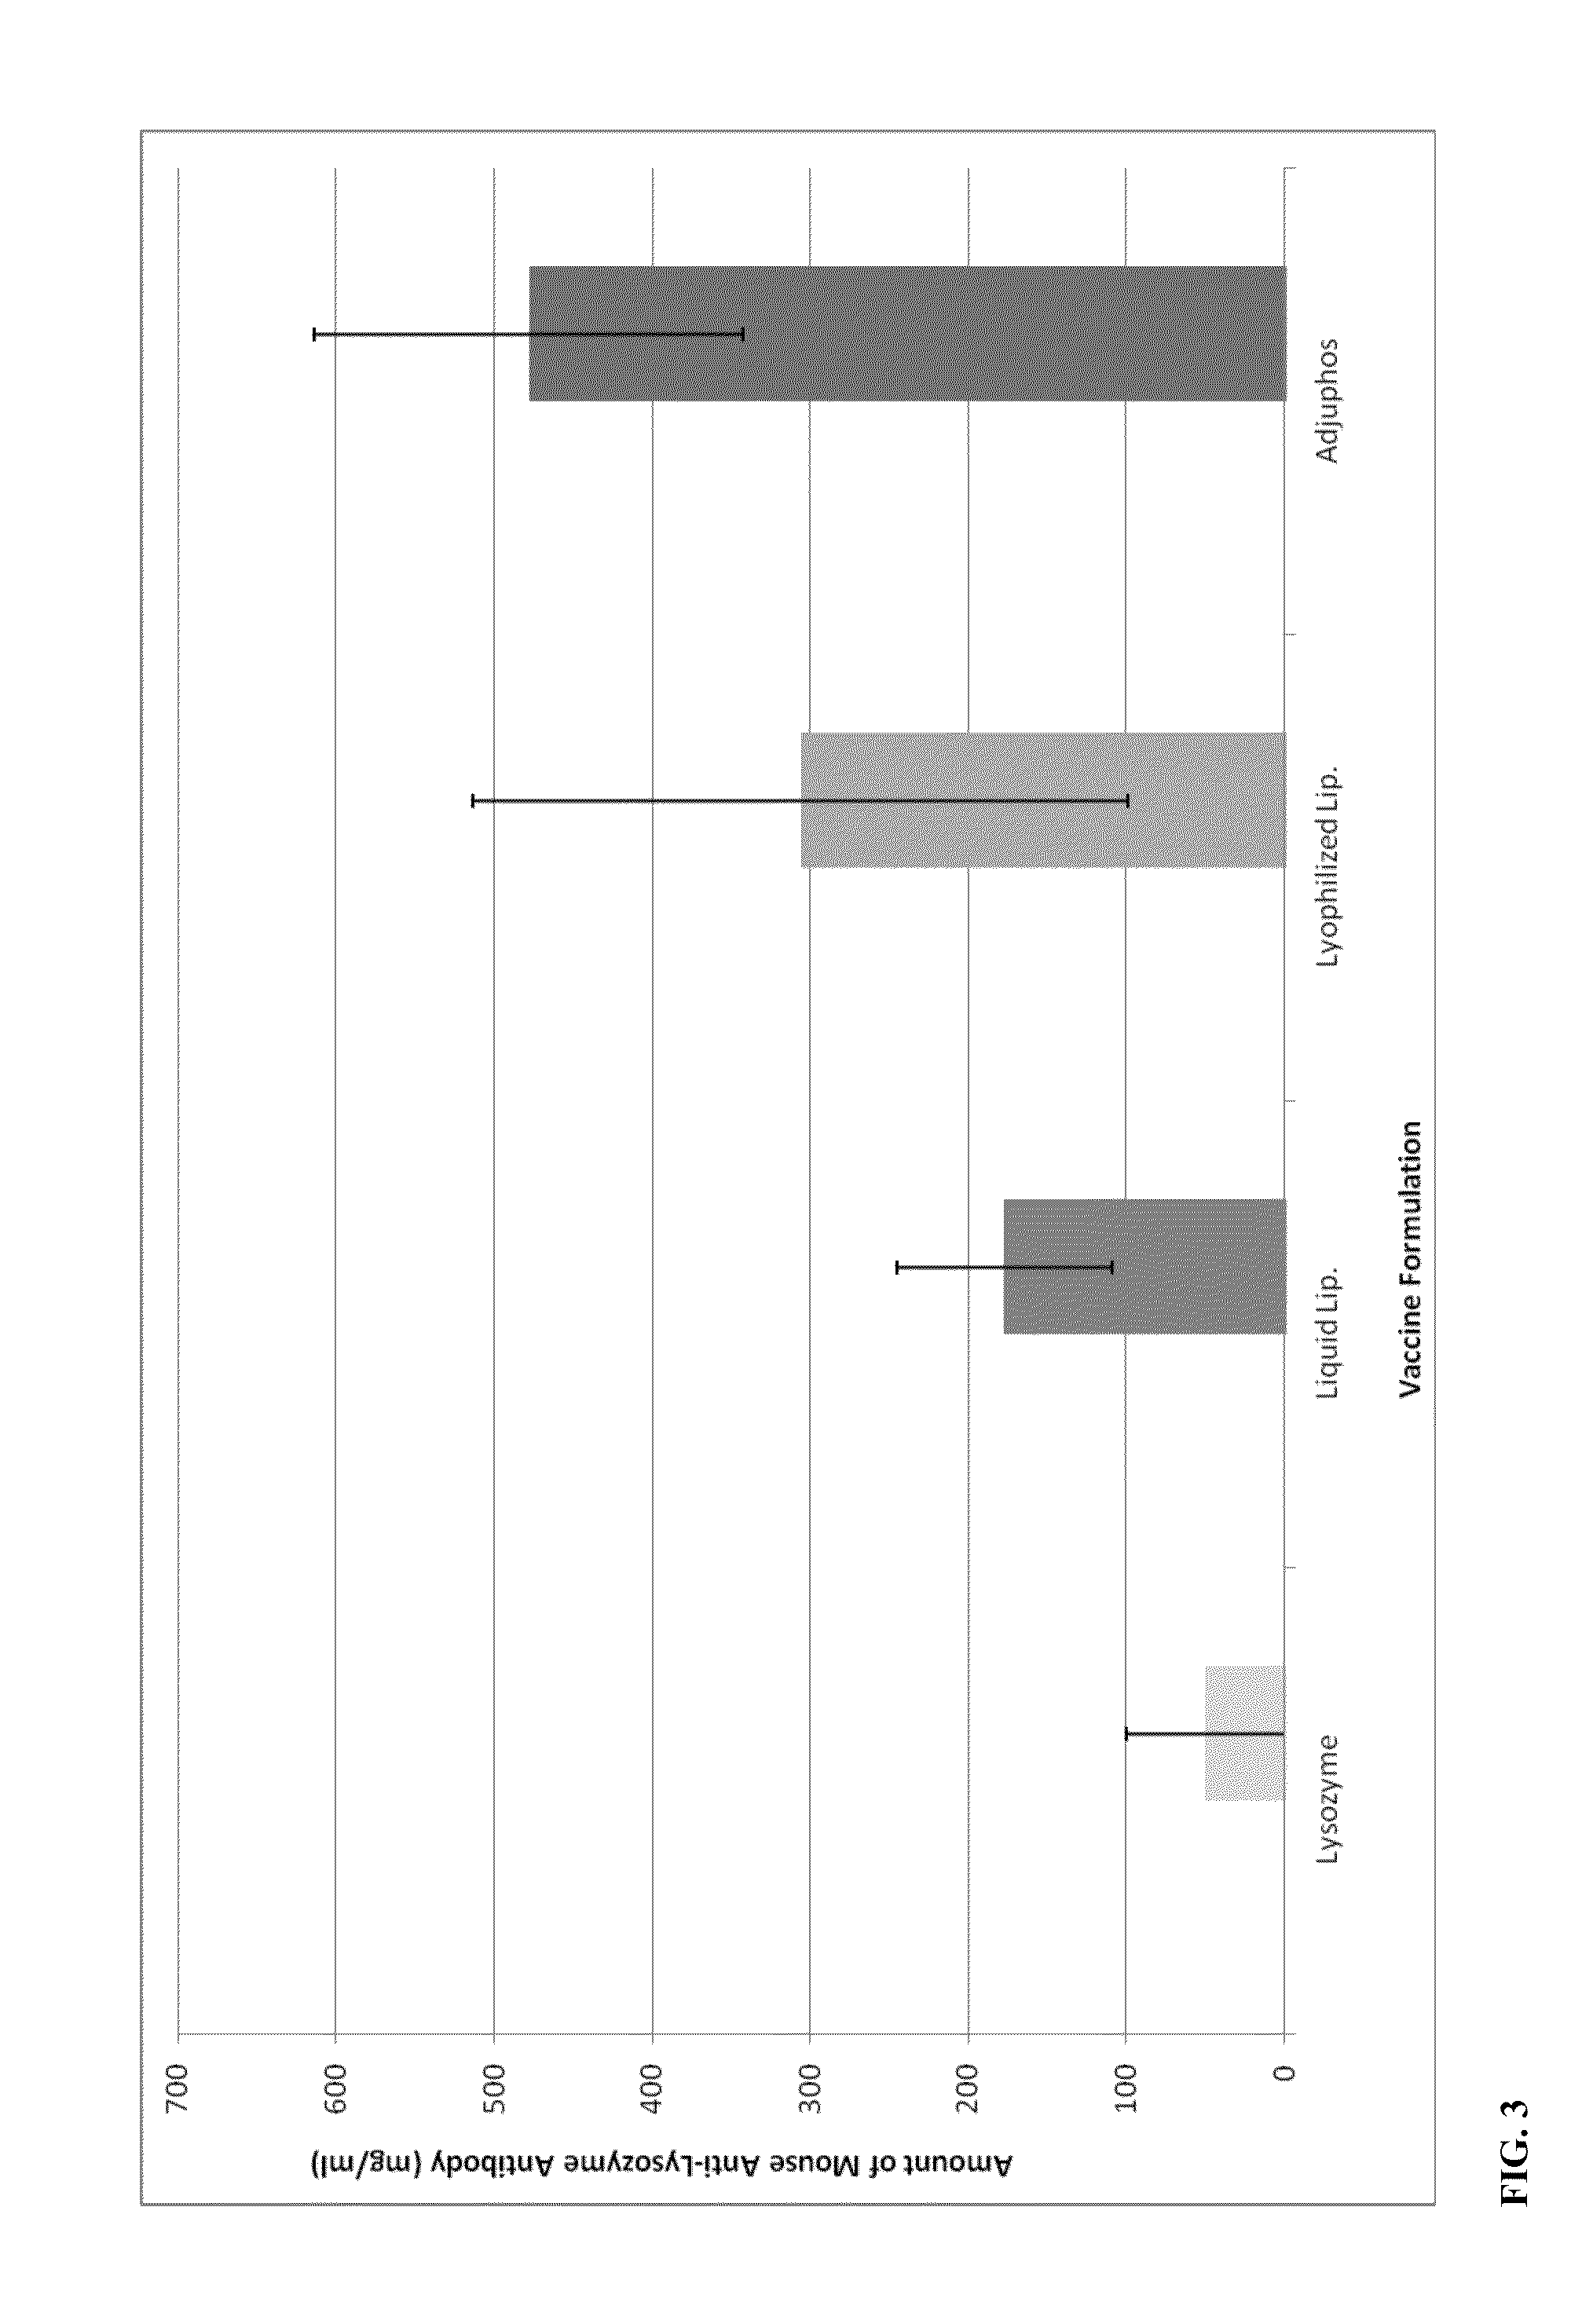 Heat-and freeze-stable vaccines and methods of making and using same